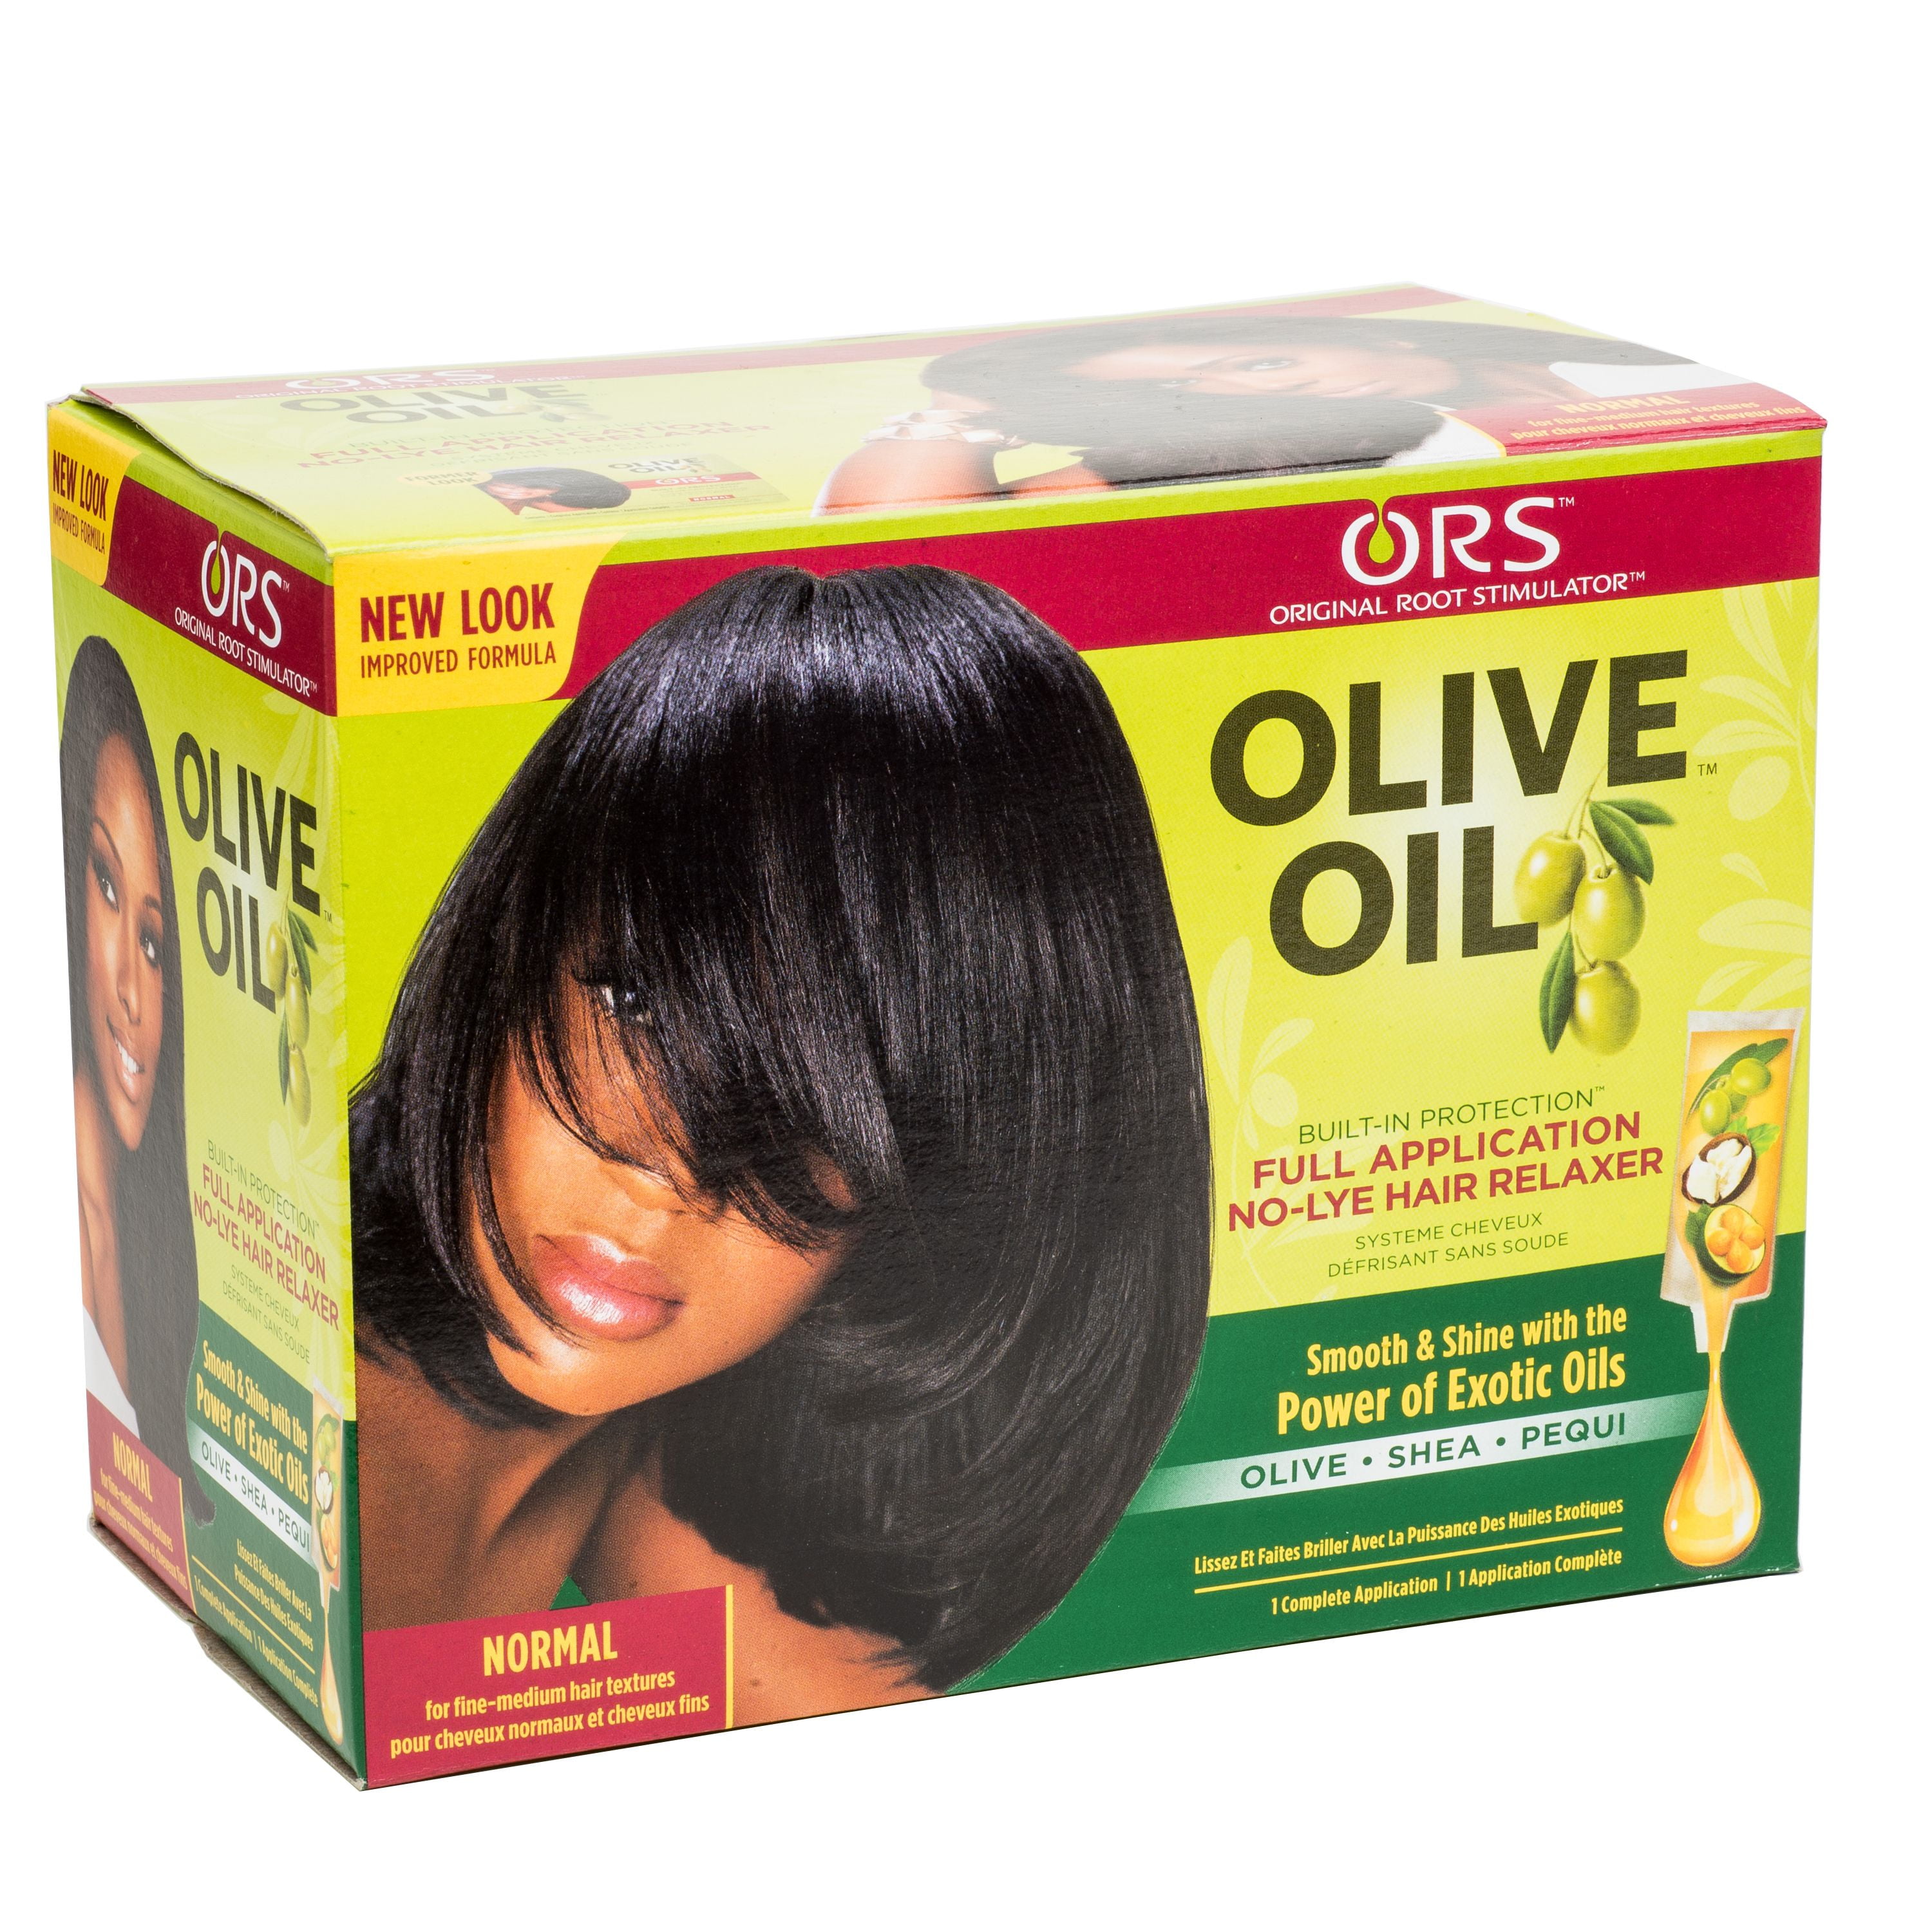 Ors Olive Oil No Lye Hair Relaxer Normal 1 Ct Box Walmart Com